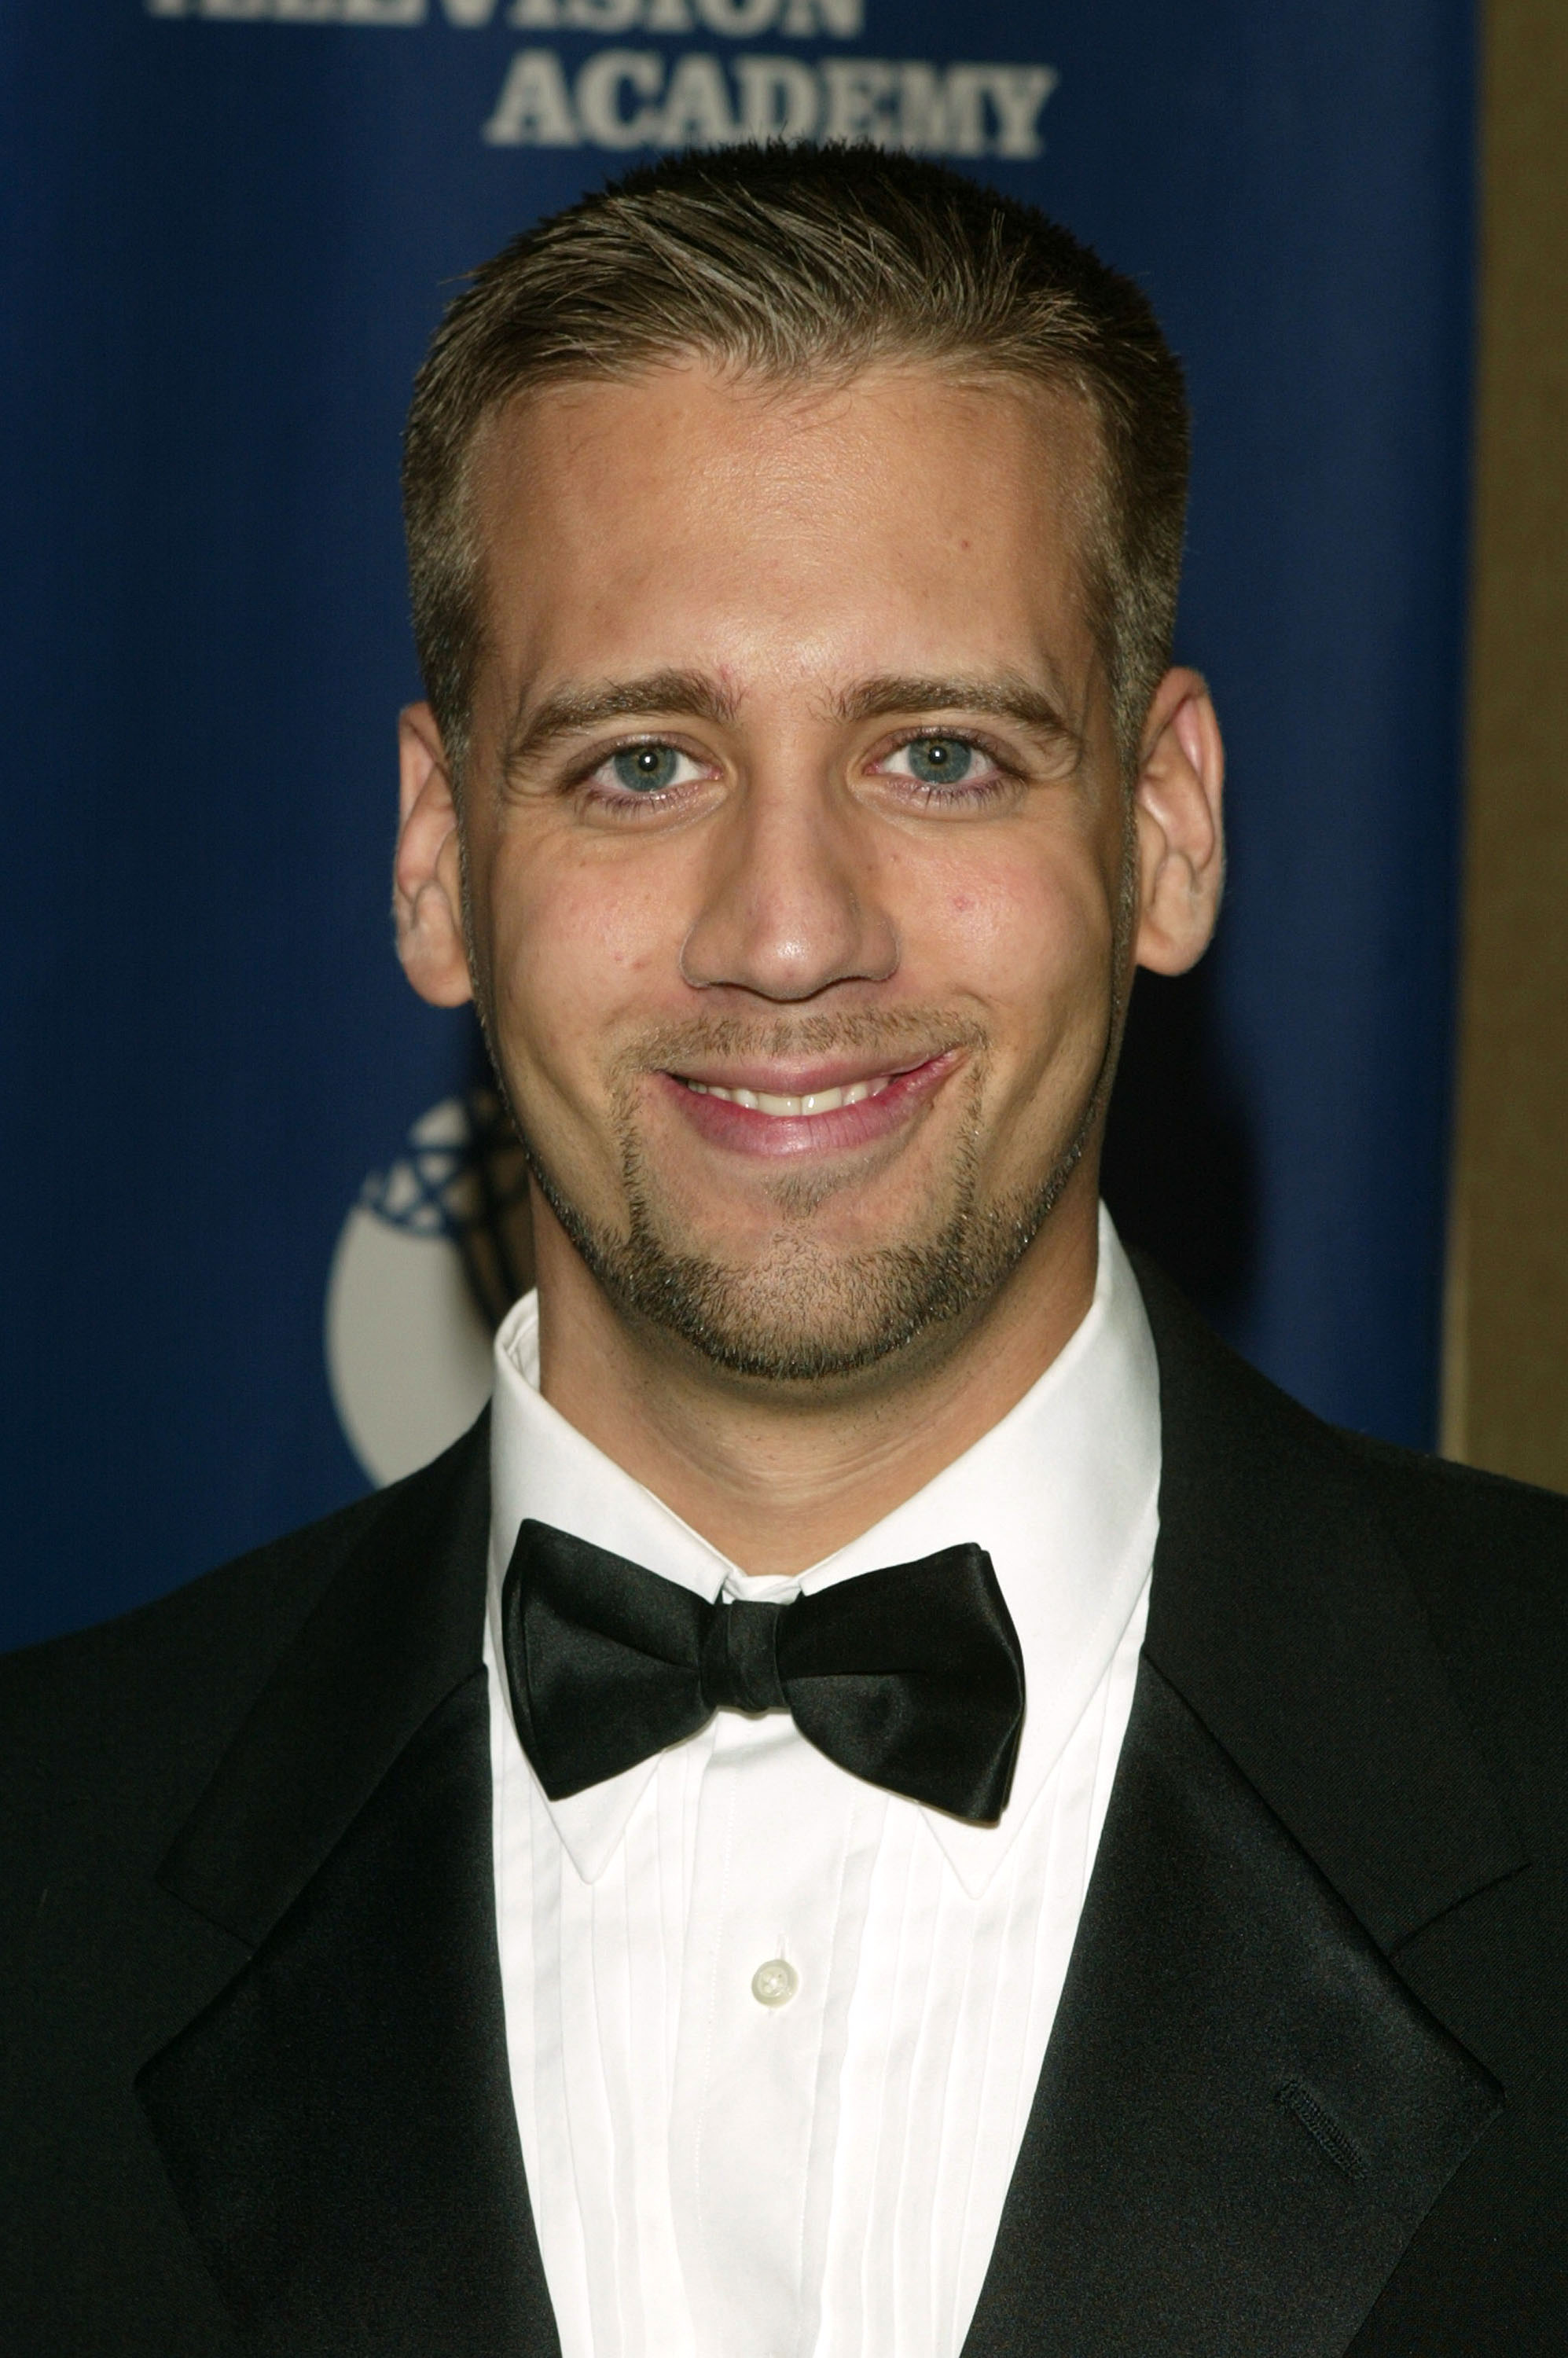 NEW YORK - APRIL 19:  Sports announcer Max Kellerman attends the 25th Annual Sports Emmy Awards April 19, 2004 in New York City.  (Photo by Peter Kramer/Getty Images)